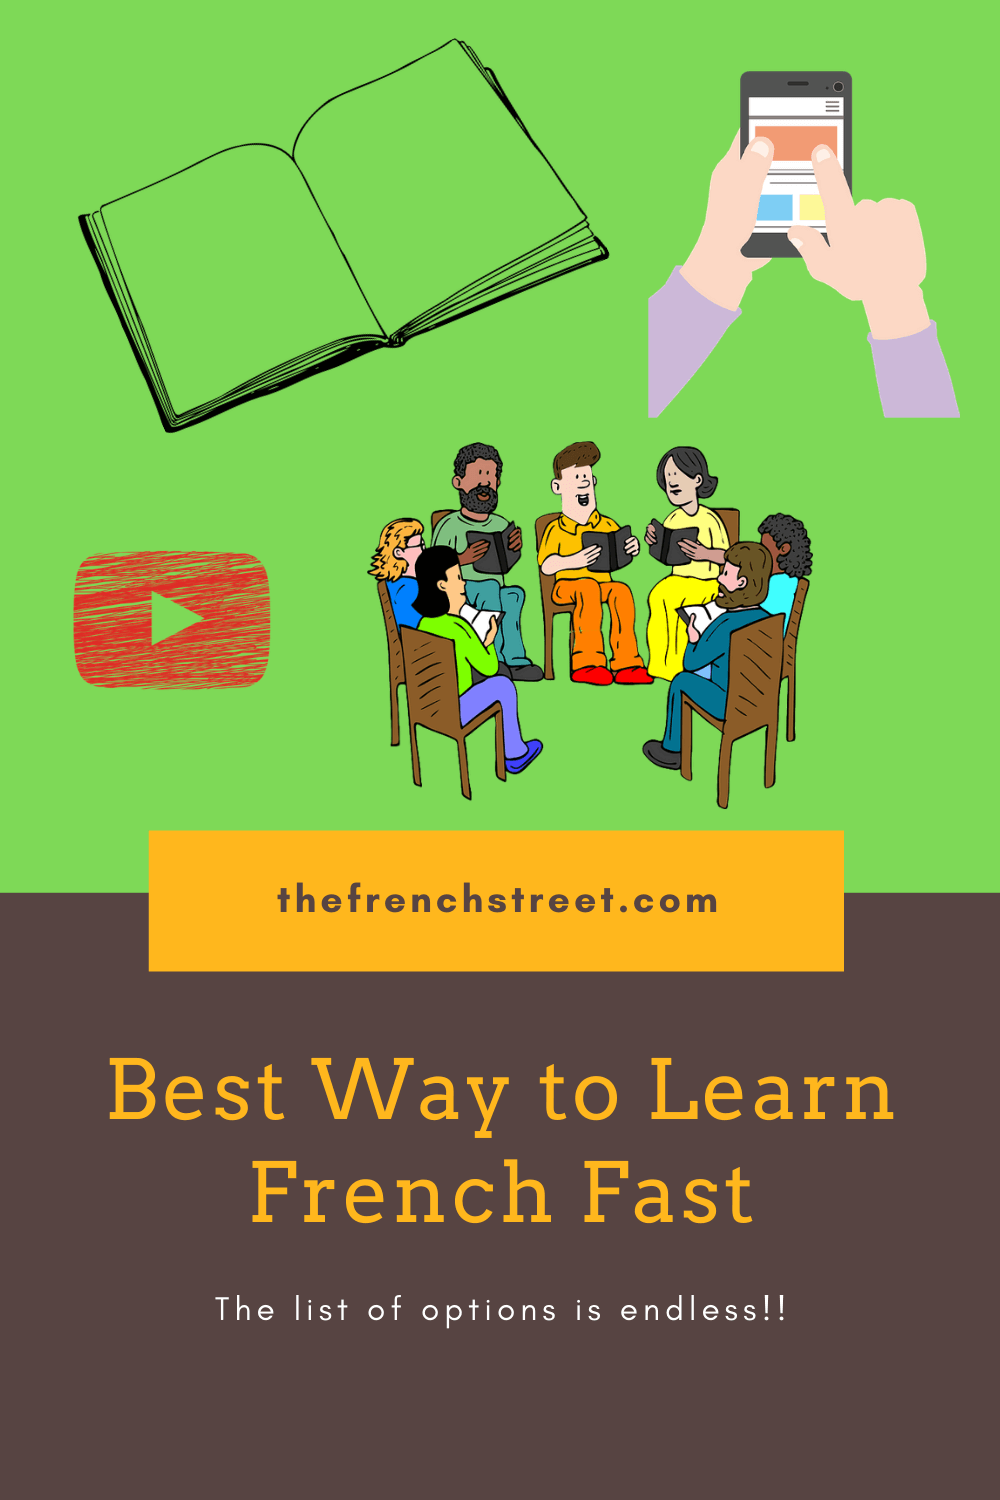 Best Way to Learn French Fast